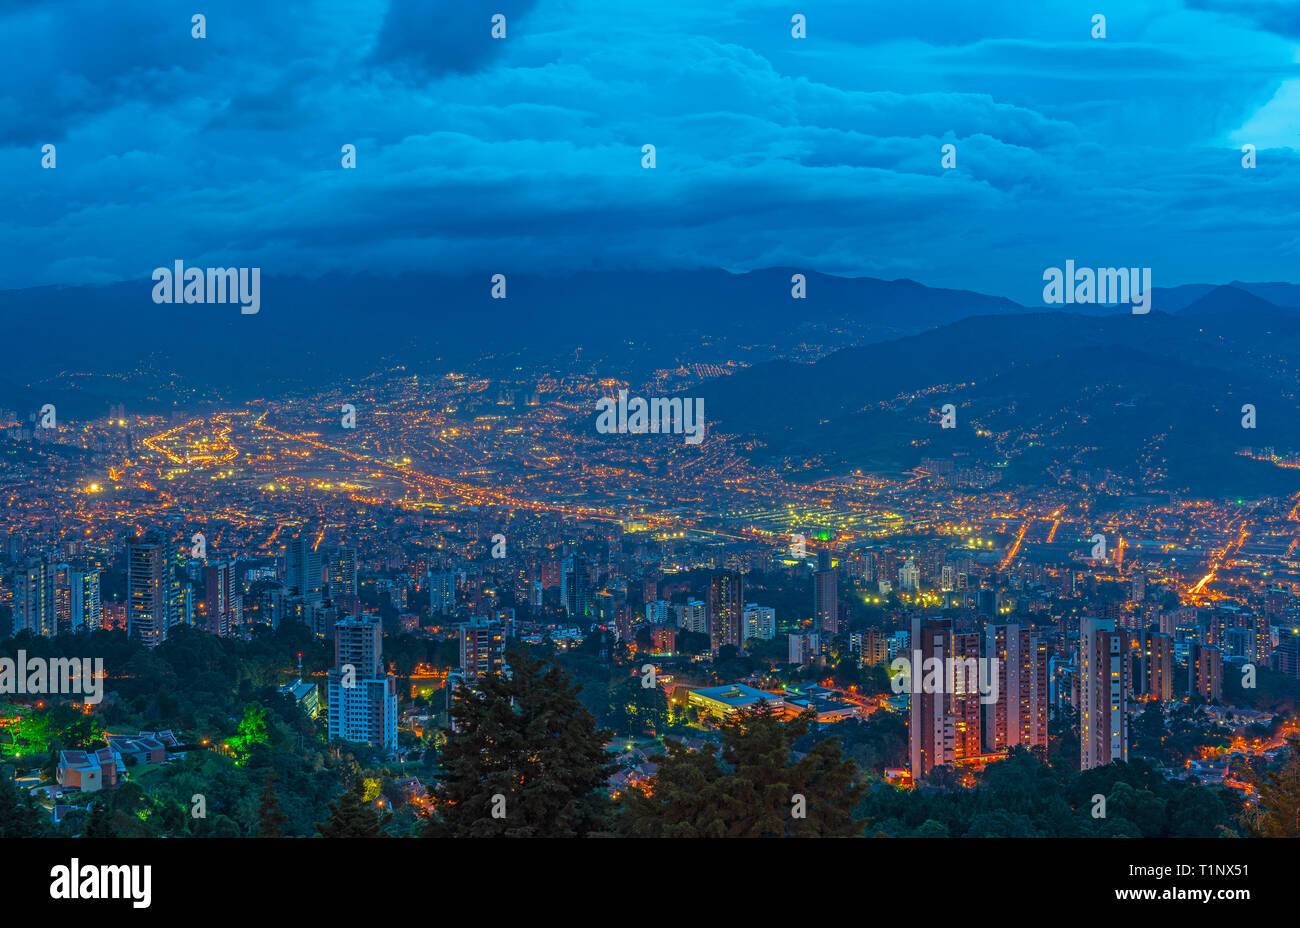 Cityscape of Medellin city at night (blue hour) with its modern skyscraper architecture located in a valley of the Andes mountain range, Colombia. Stock Photo